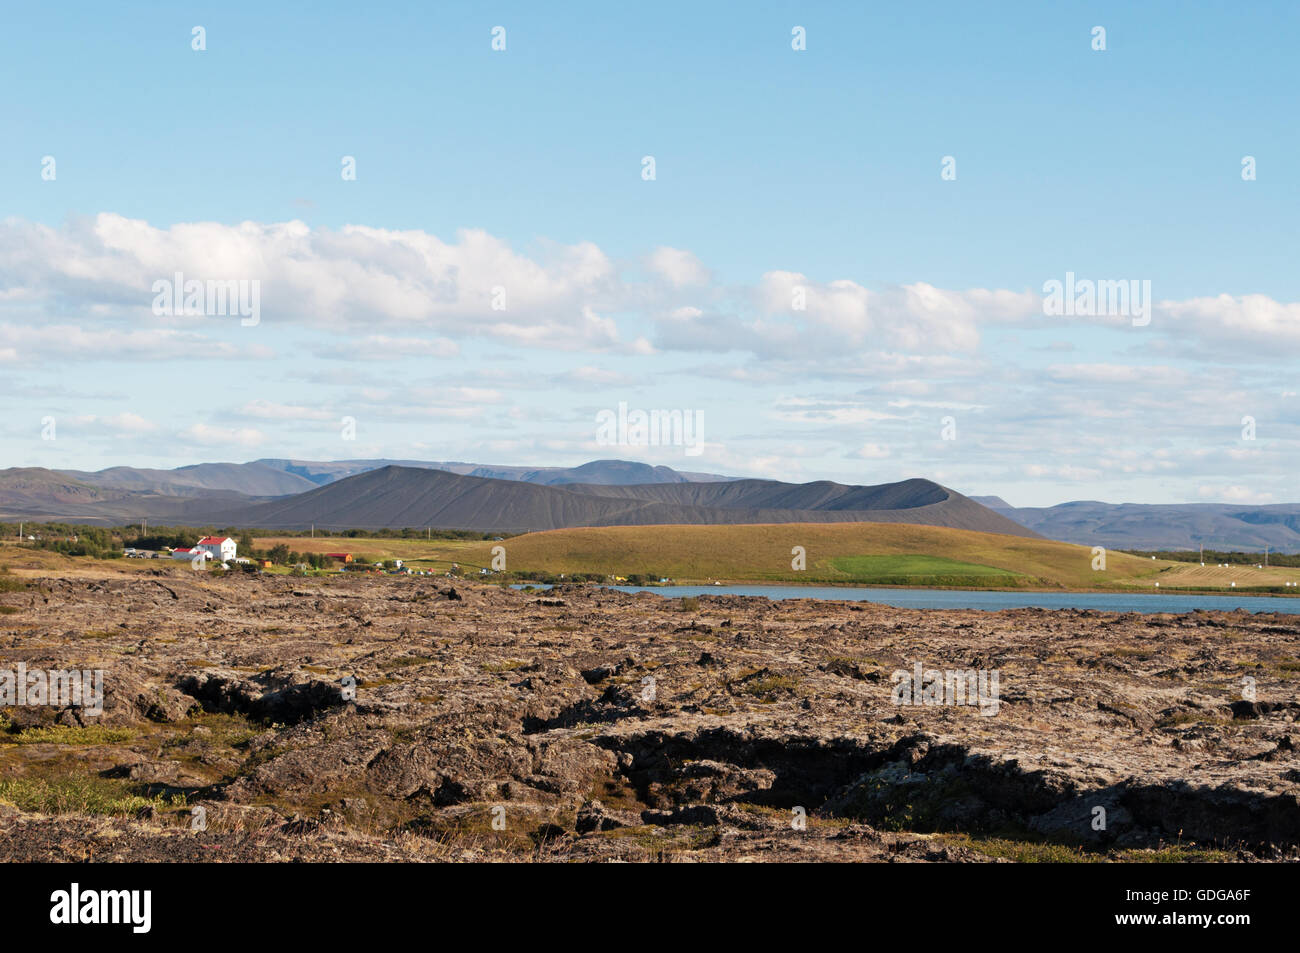 Iceland: view of the volcano Hverfjall, a tephra cone or tuff ring volcano on Lake Myvatn, whose crater is approximately 1 kilometer in diameter Stock Photo